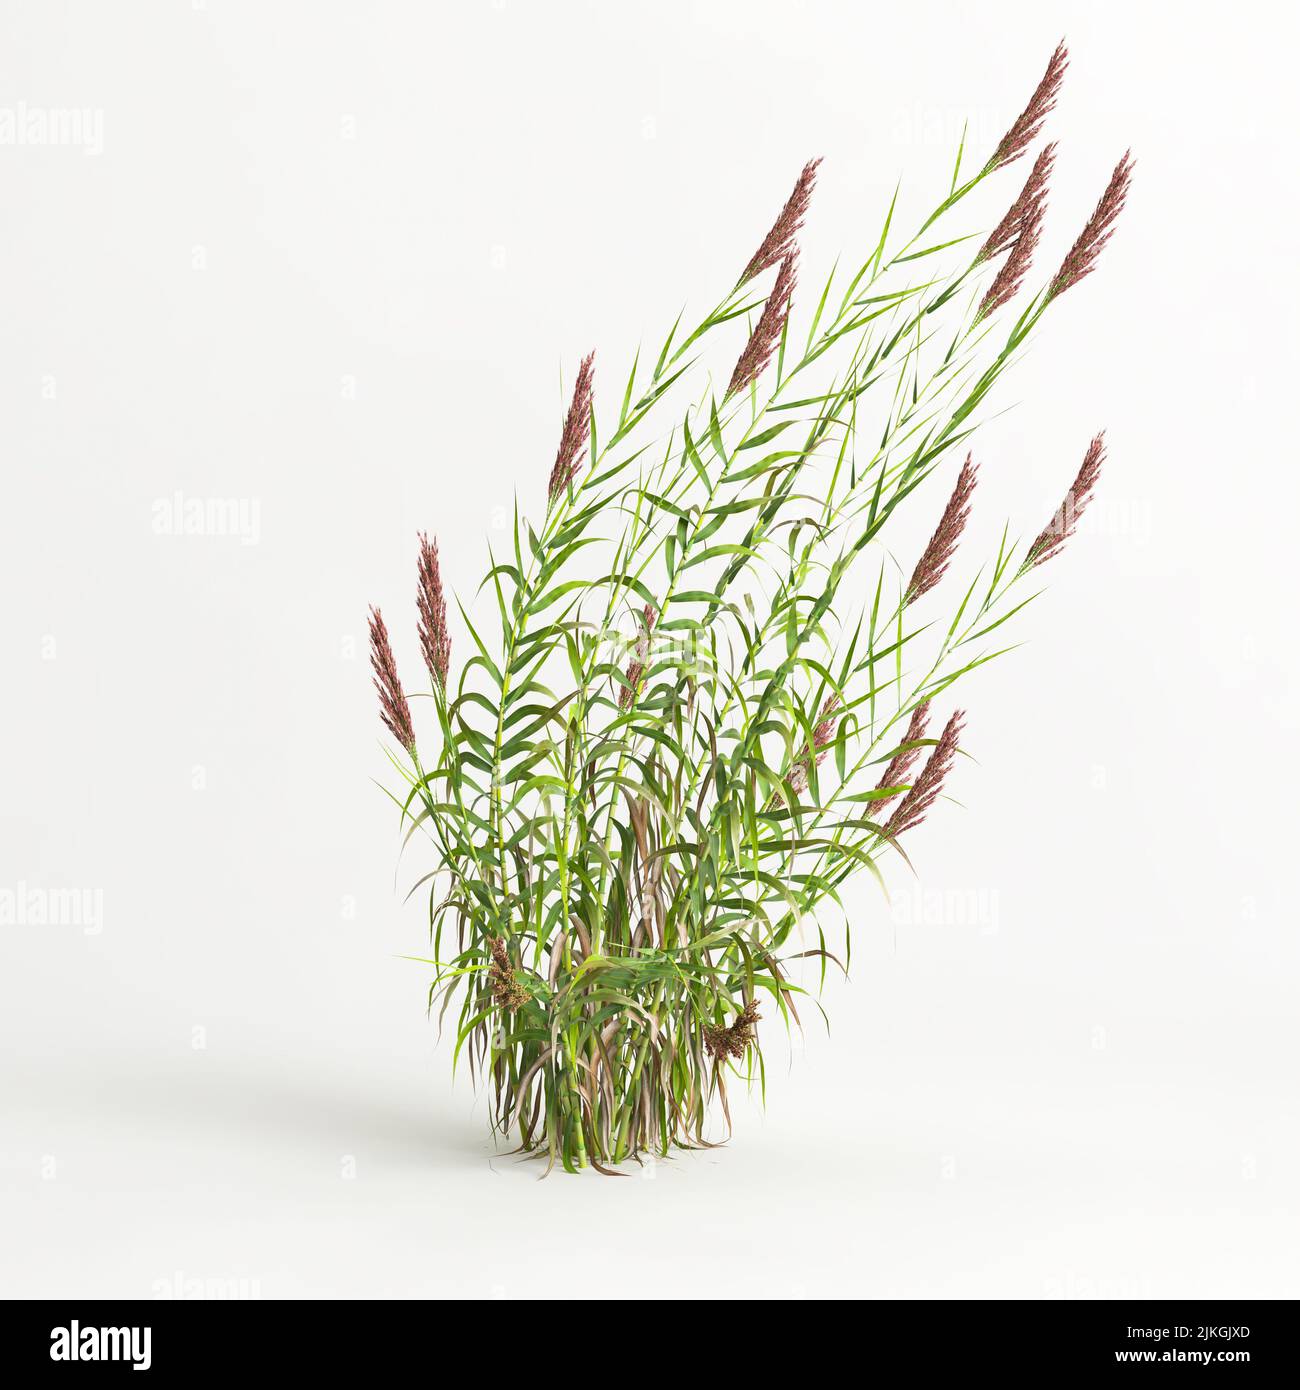 3d illustration of arundo donax grass isolated on white background Stock Photo